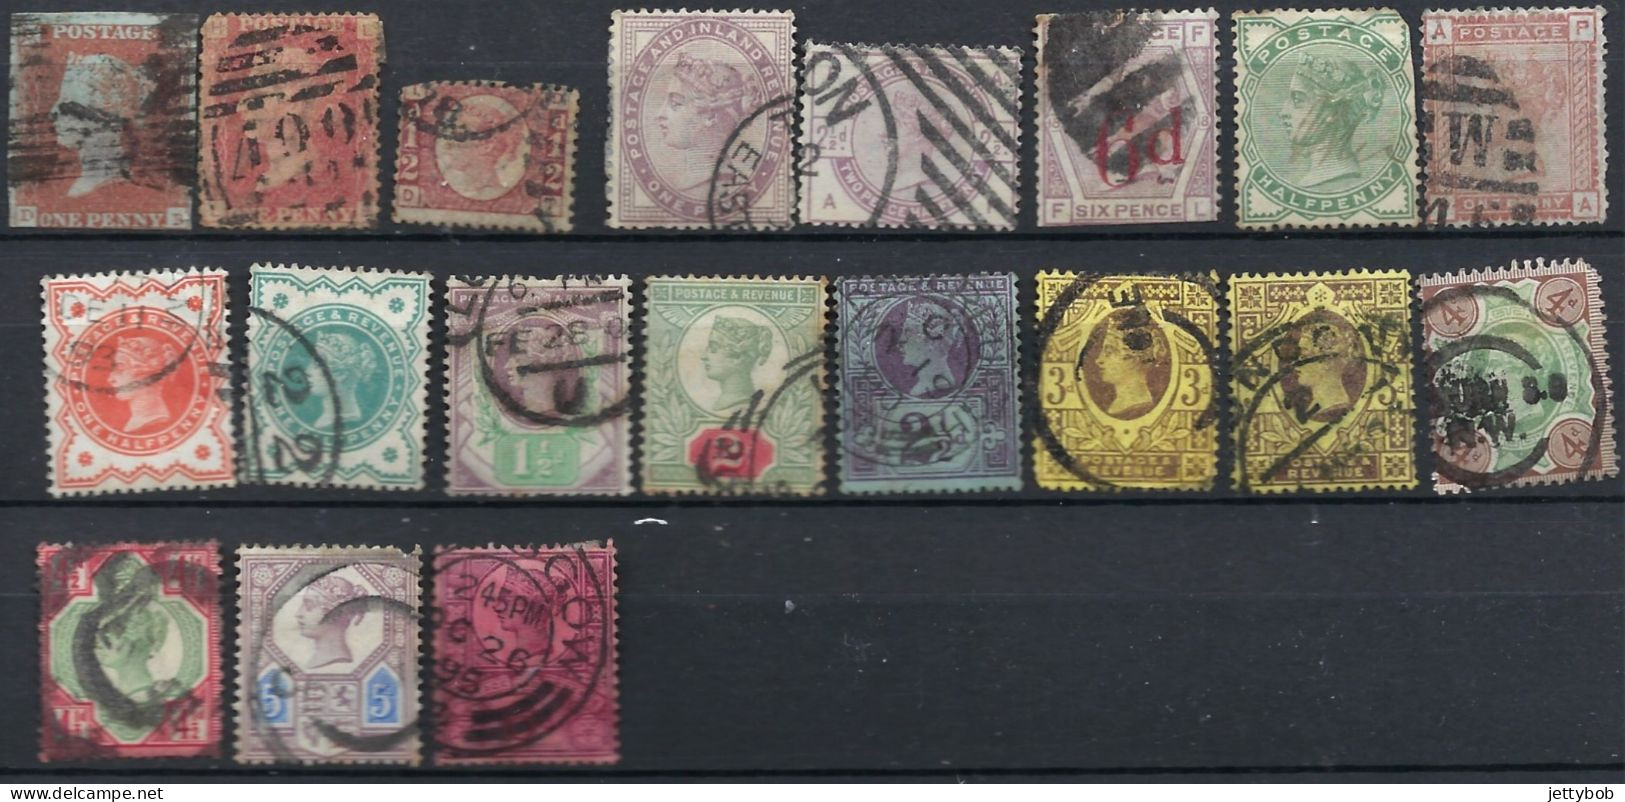 GB Small Collection Of QV Used - Sammlungen